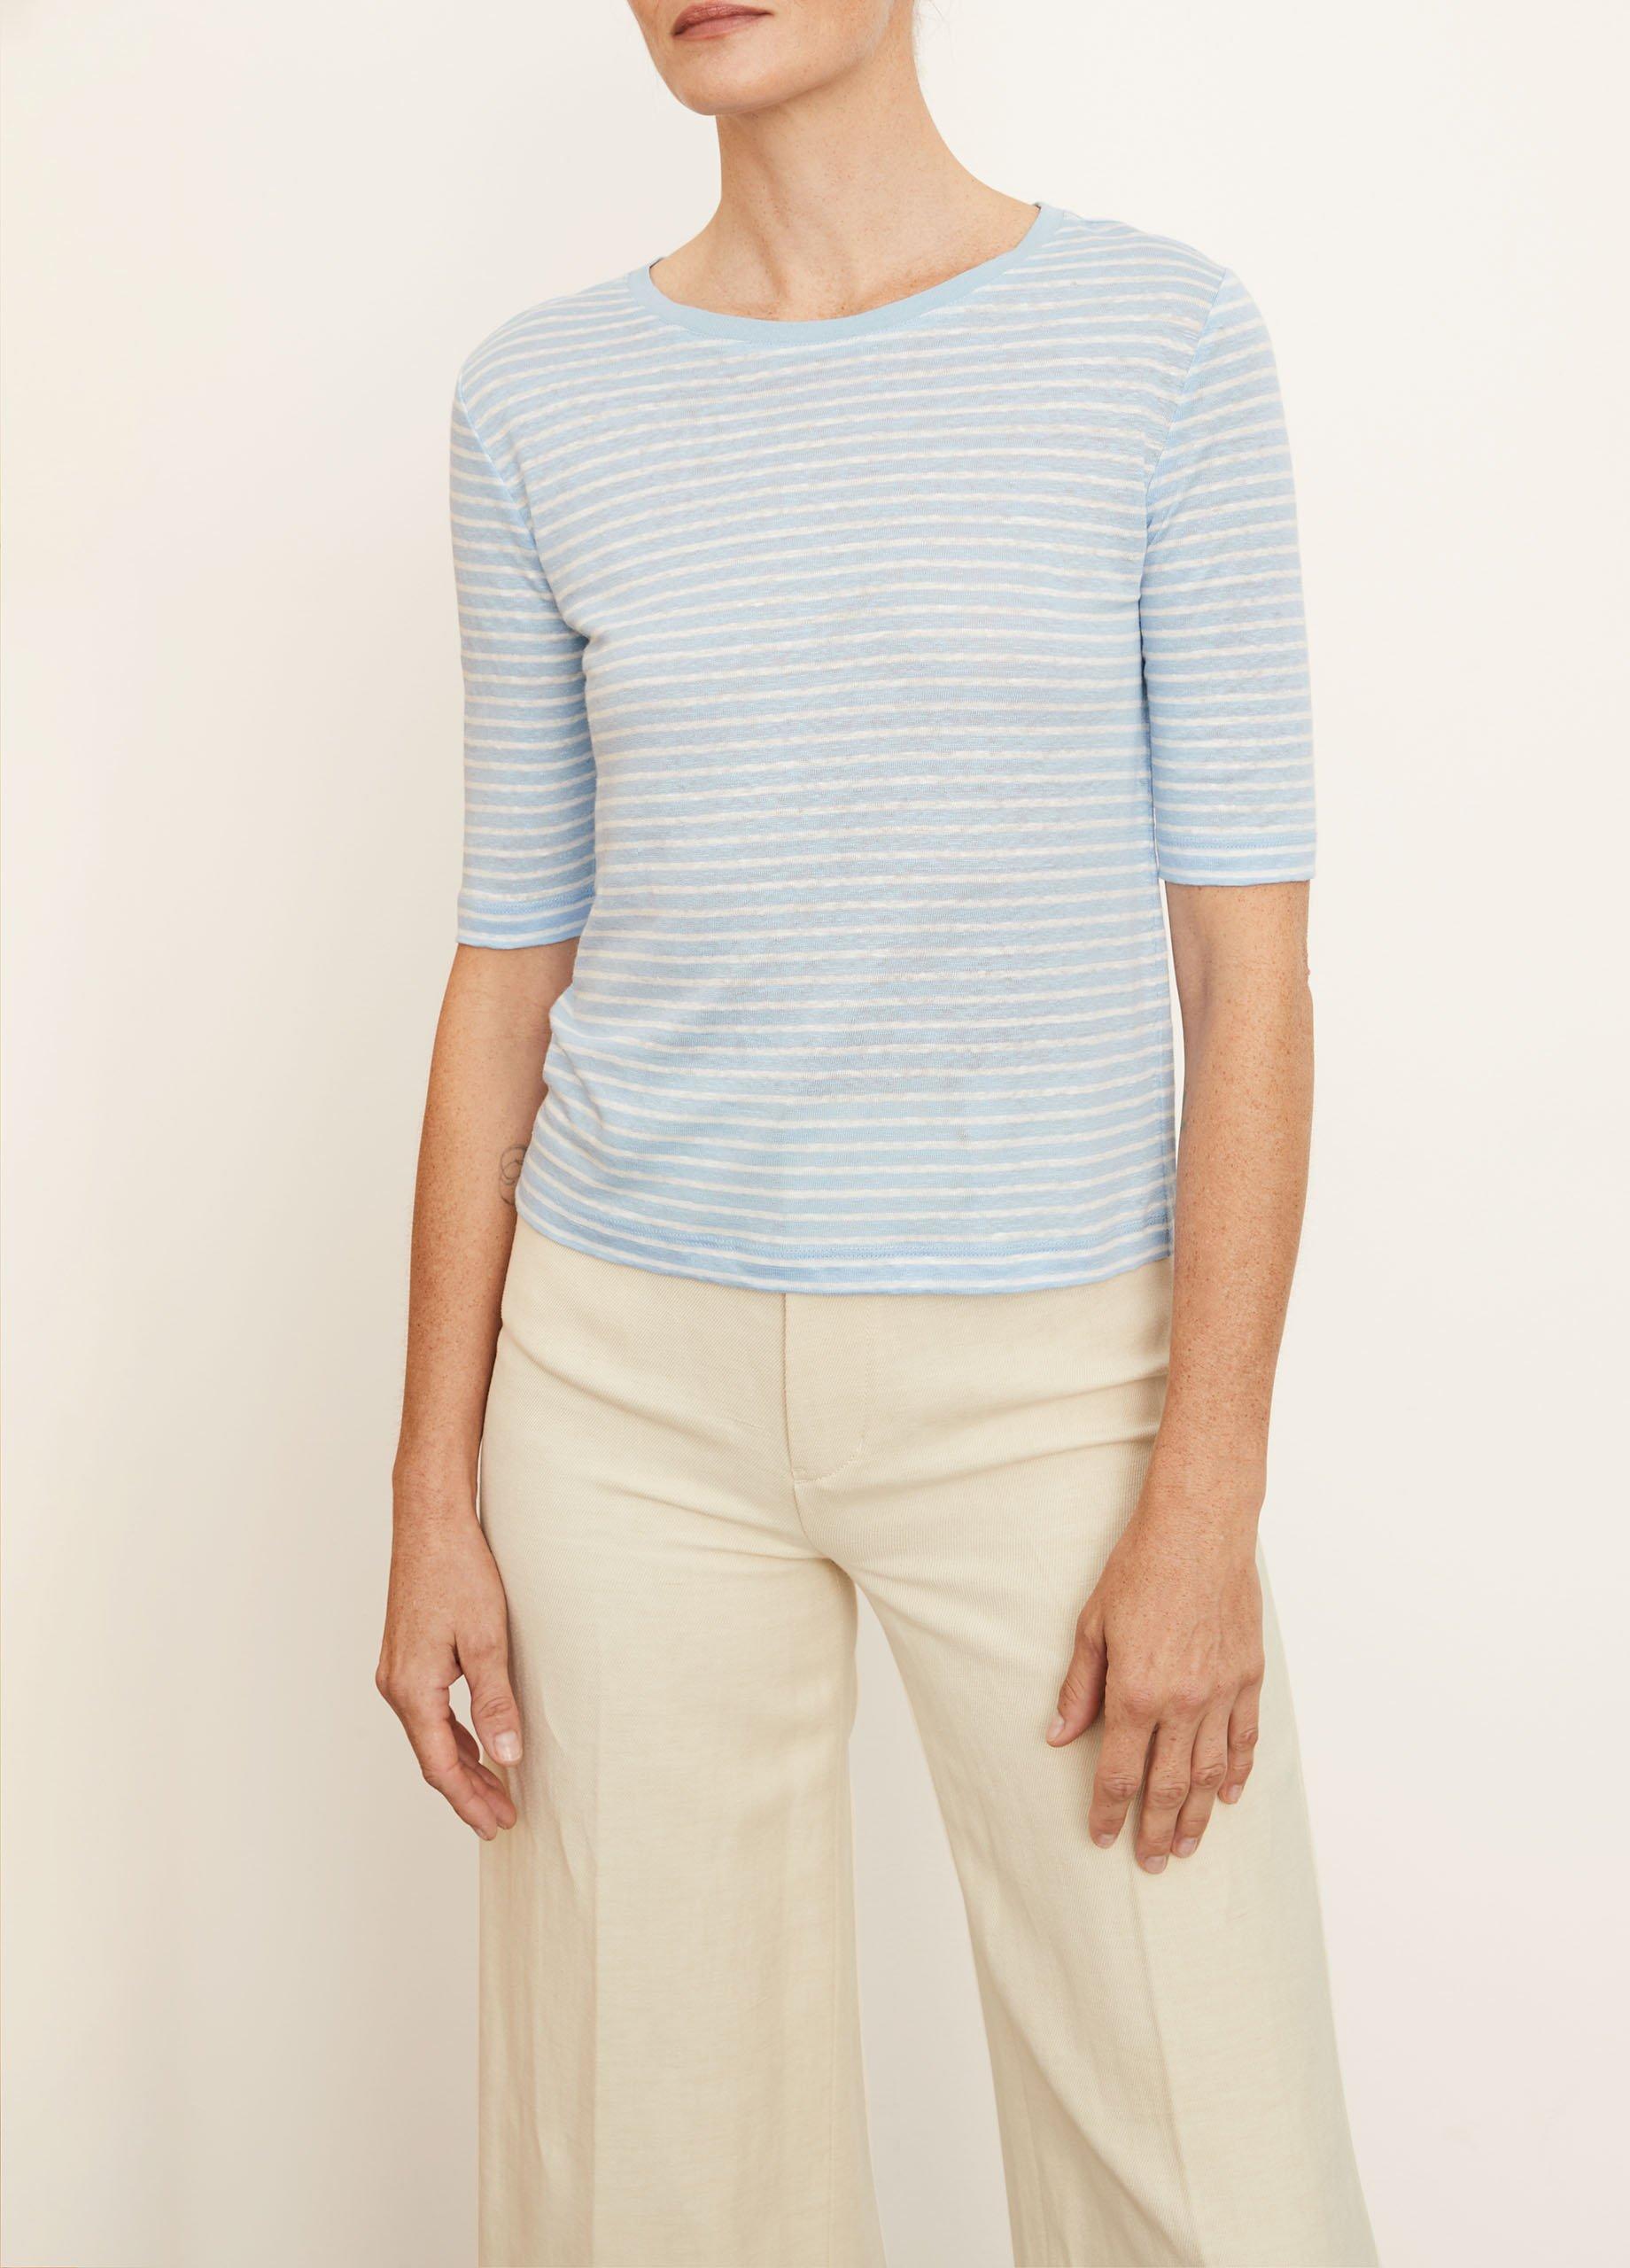 Striped Linen Elbow Sleeve Crew Neck T-Shirt in Vince Products